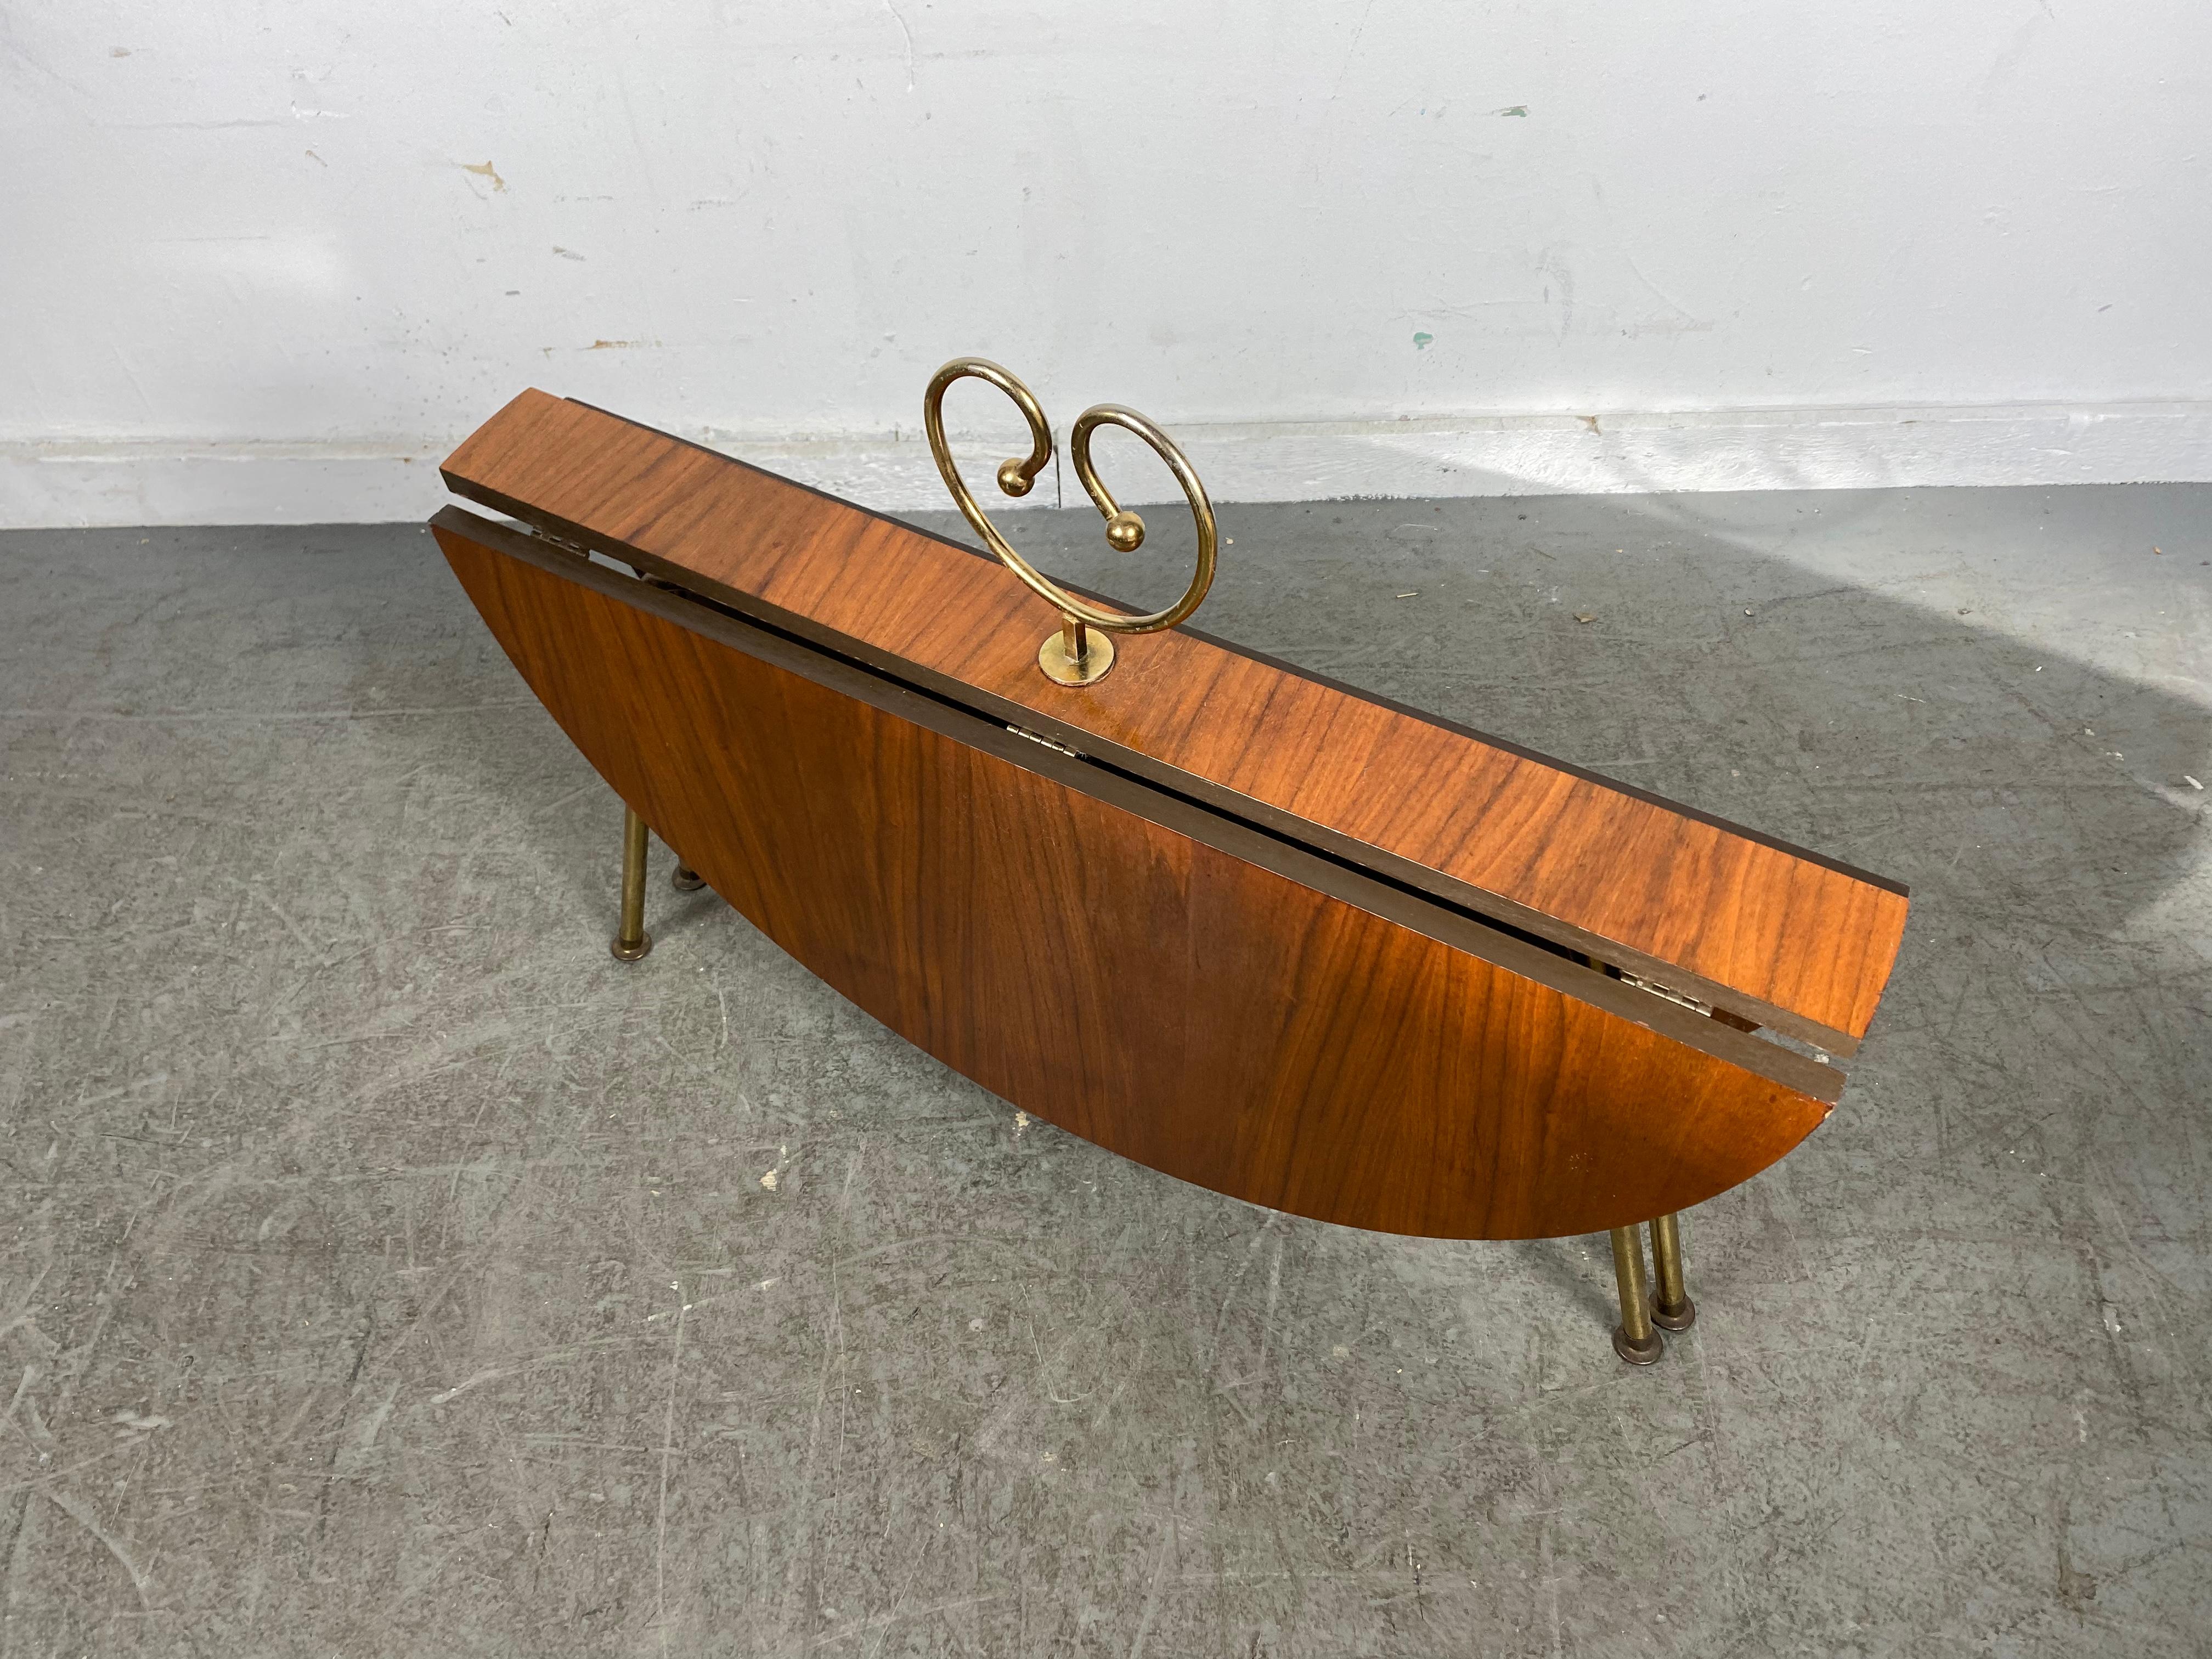 Unusual Modernist Collapsable Coffee/Cocktail Table,,Walnut & Brass.. Great design,, Folds down for convenient storage..Ingenious design..Classic Mid Century Modern design.